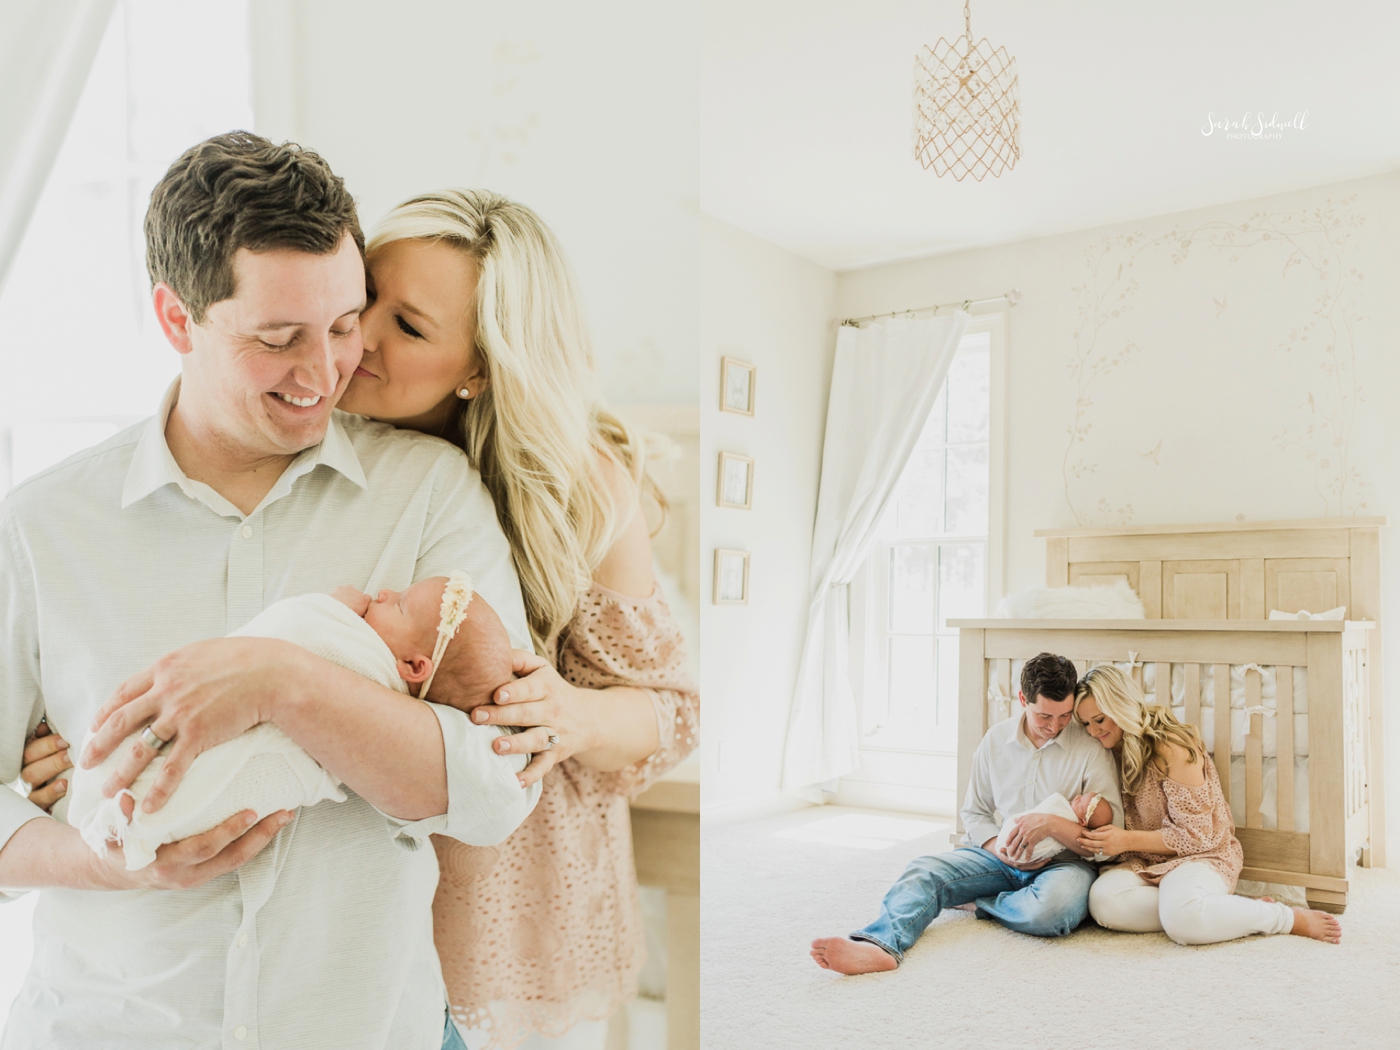 Newborn and Maternity | Sarah Sidwell Photography